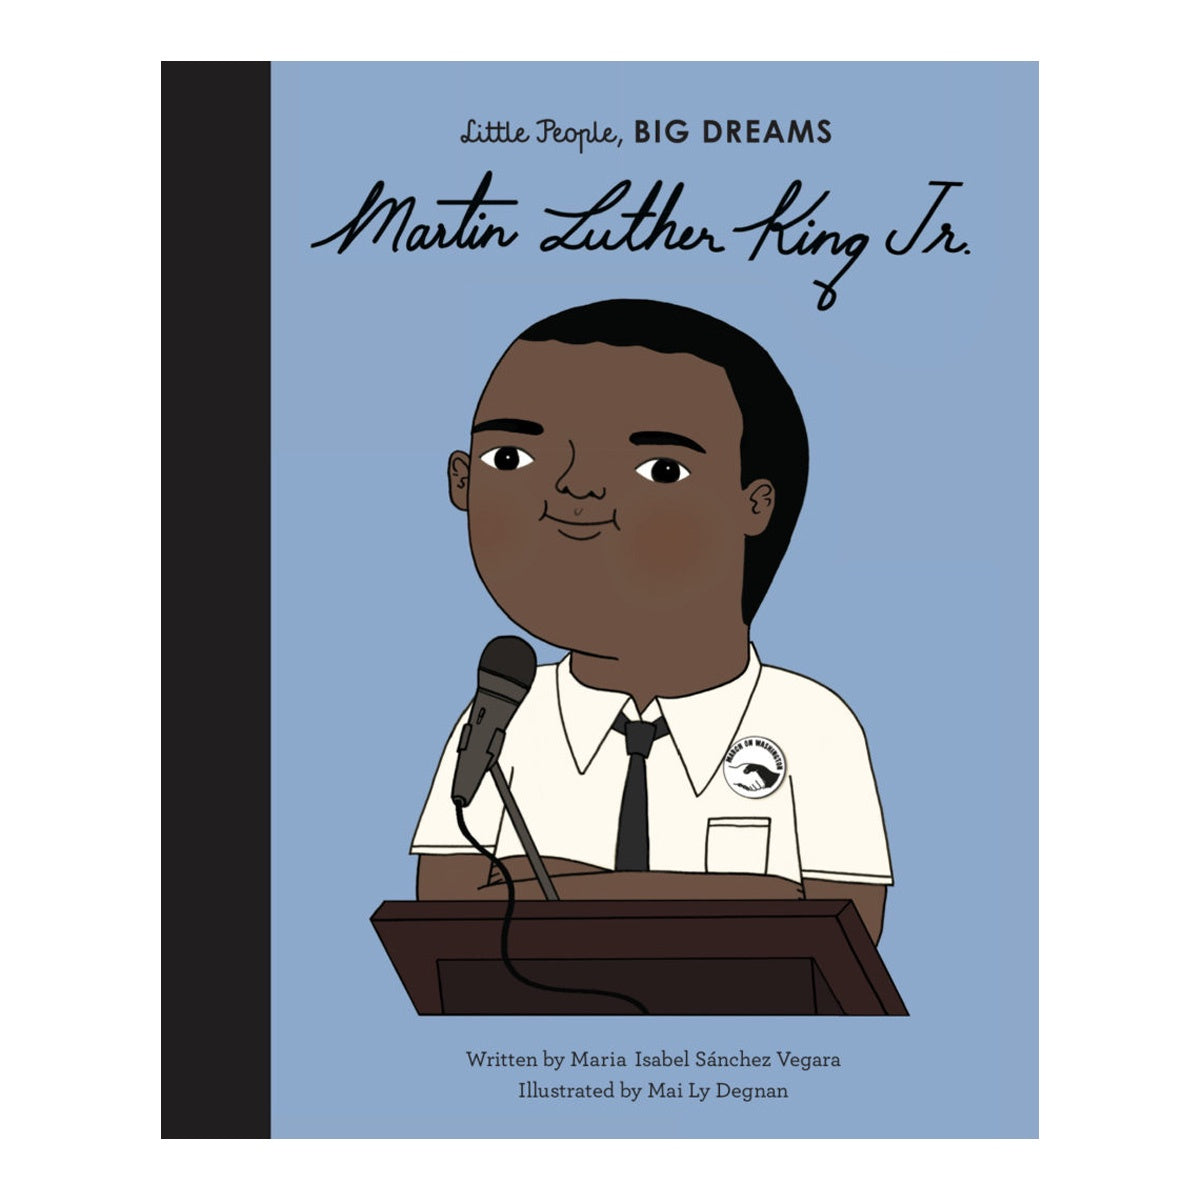 My First Little People, Big Dreams: Martin Luther King Jr.